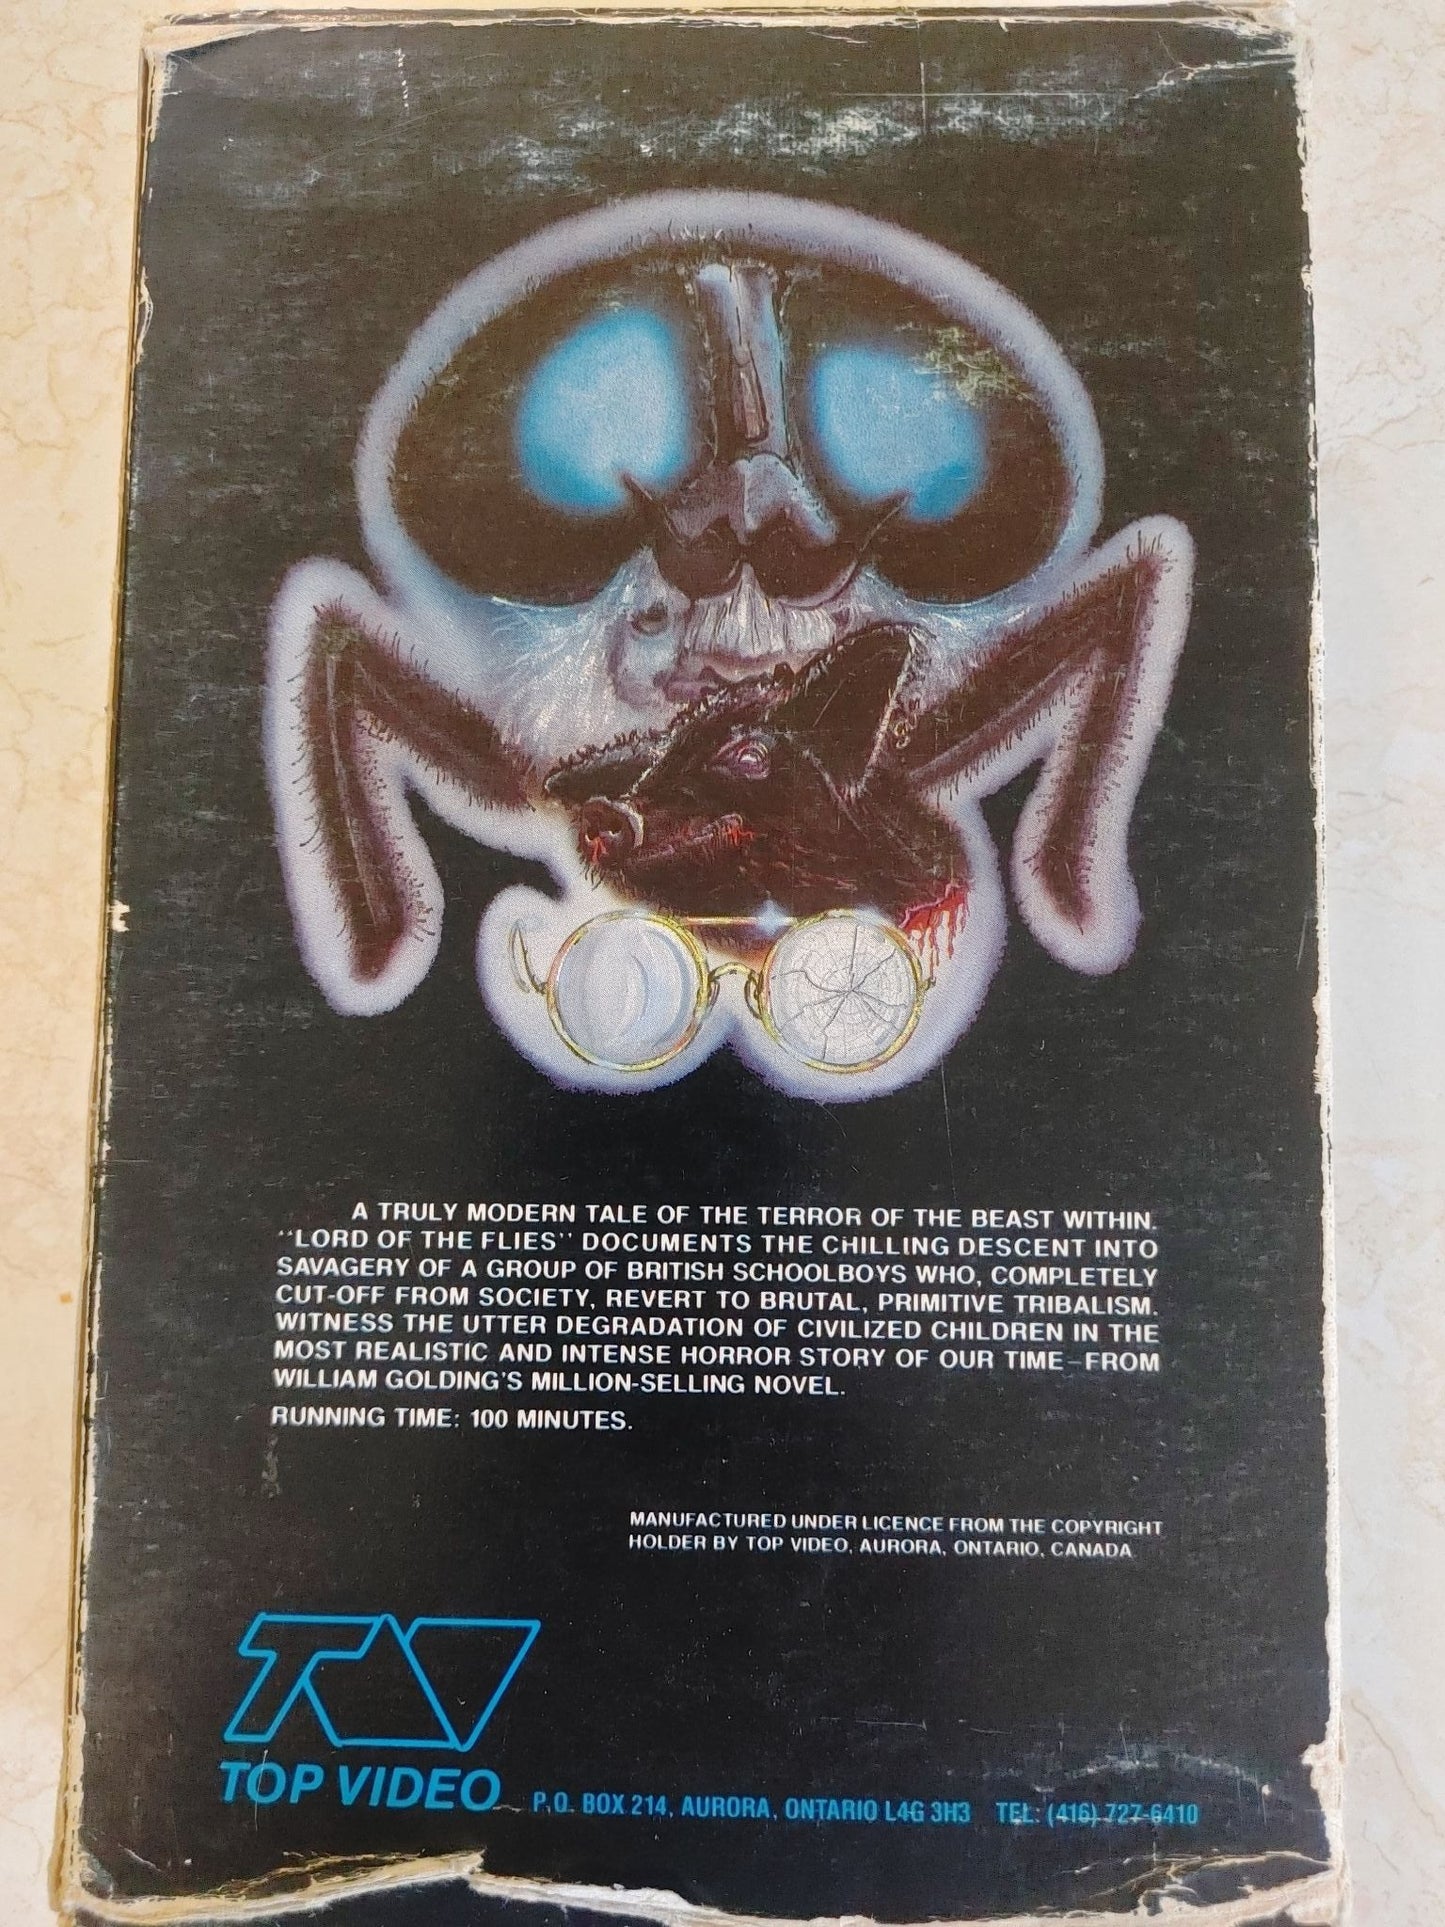 Lord of the Flies (1963 film) VHS